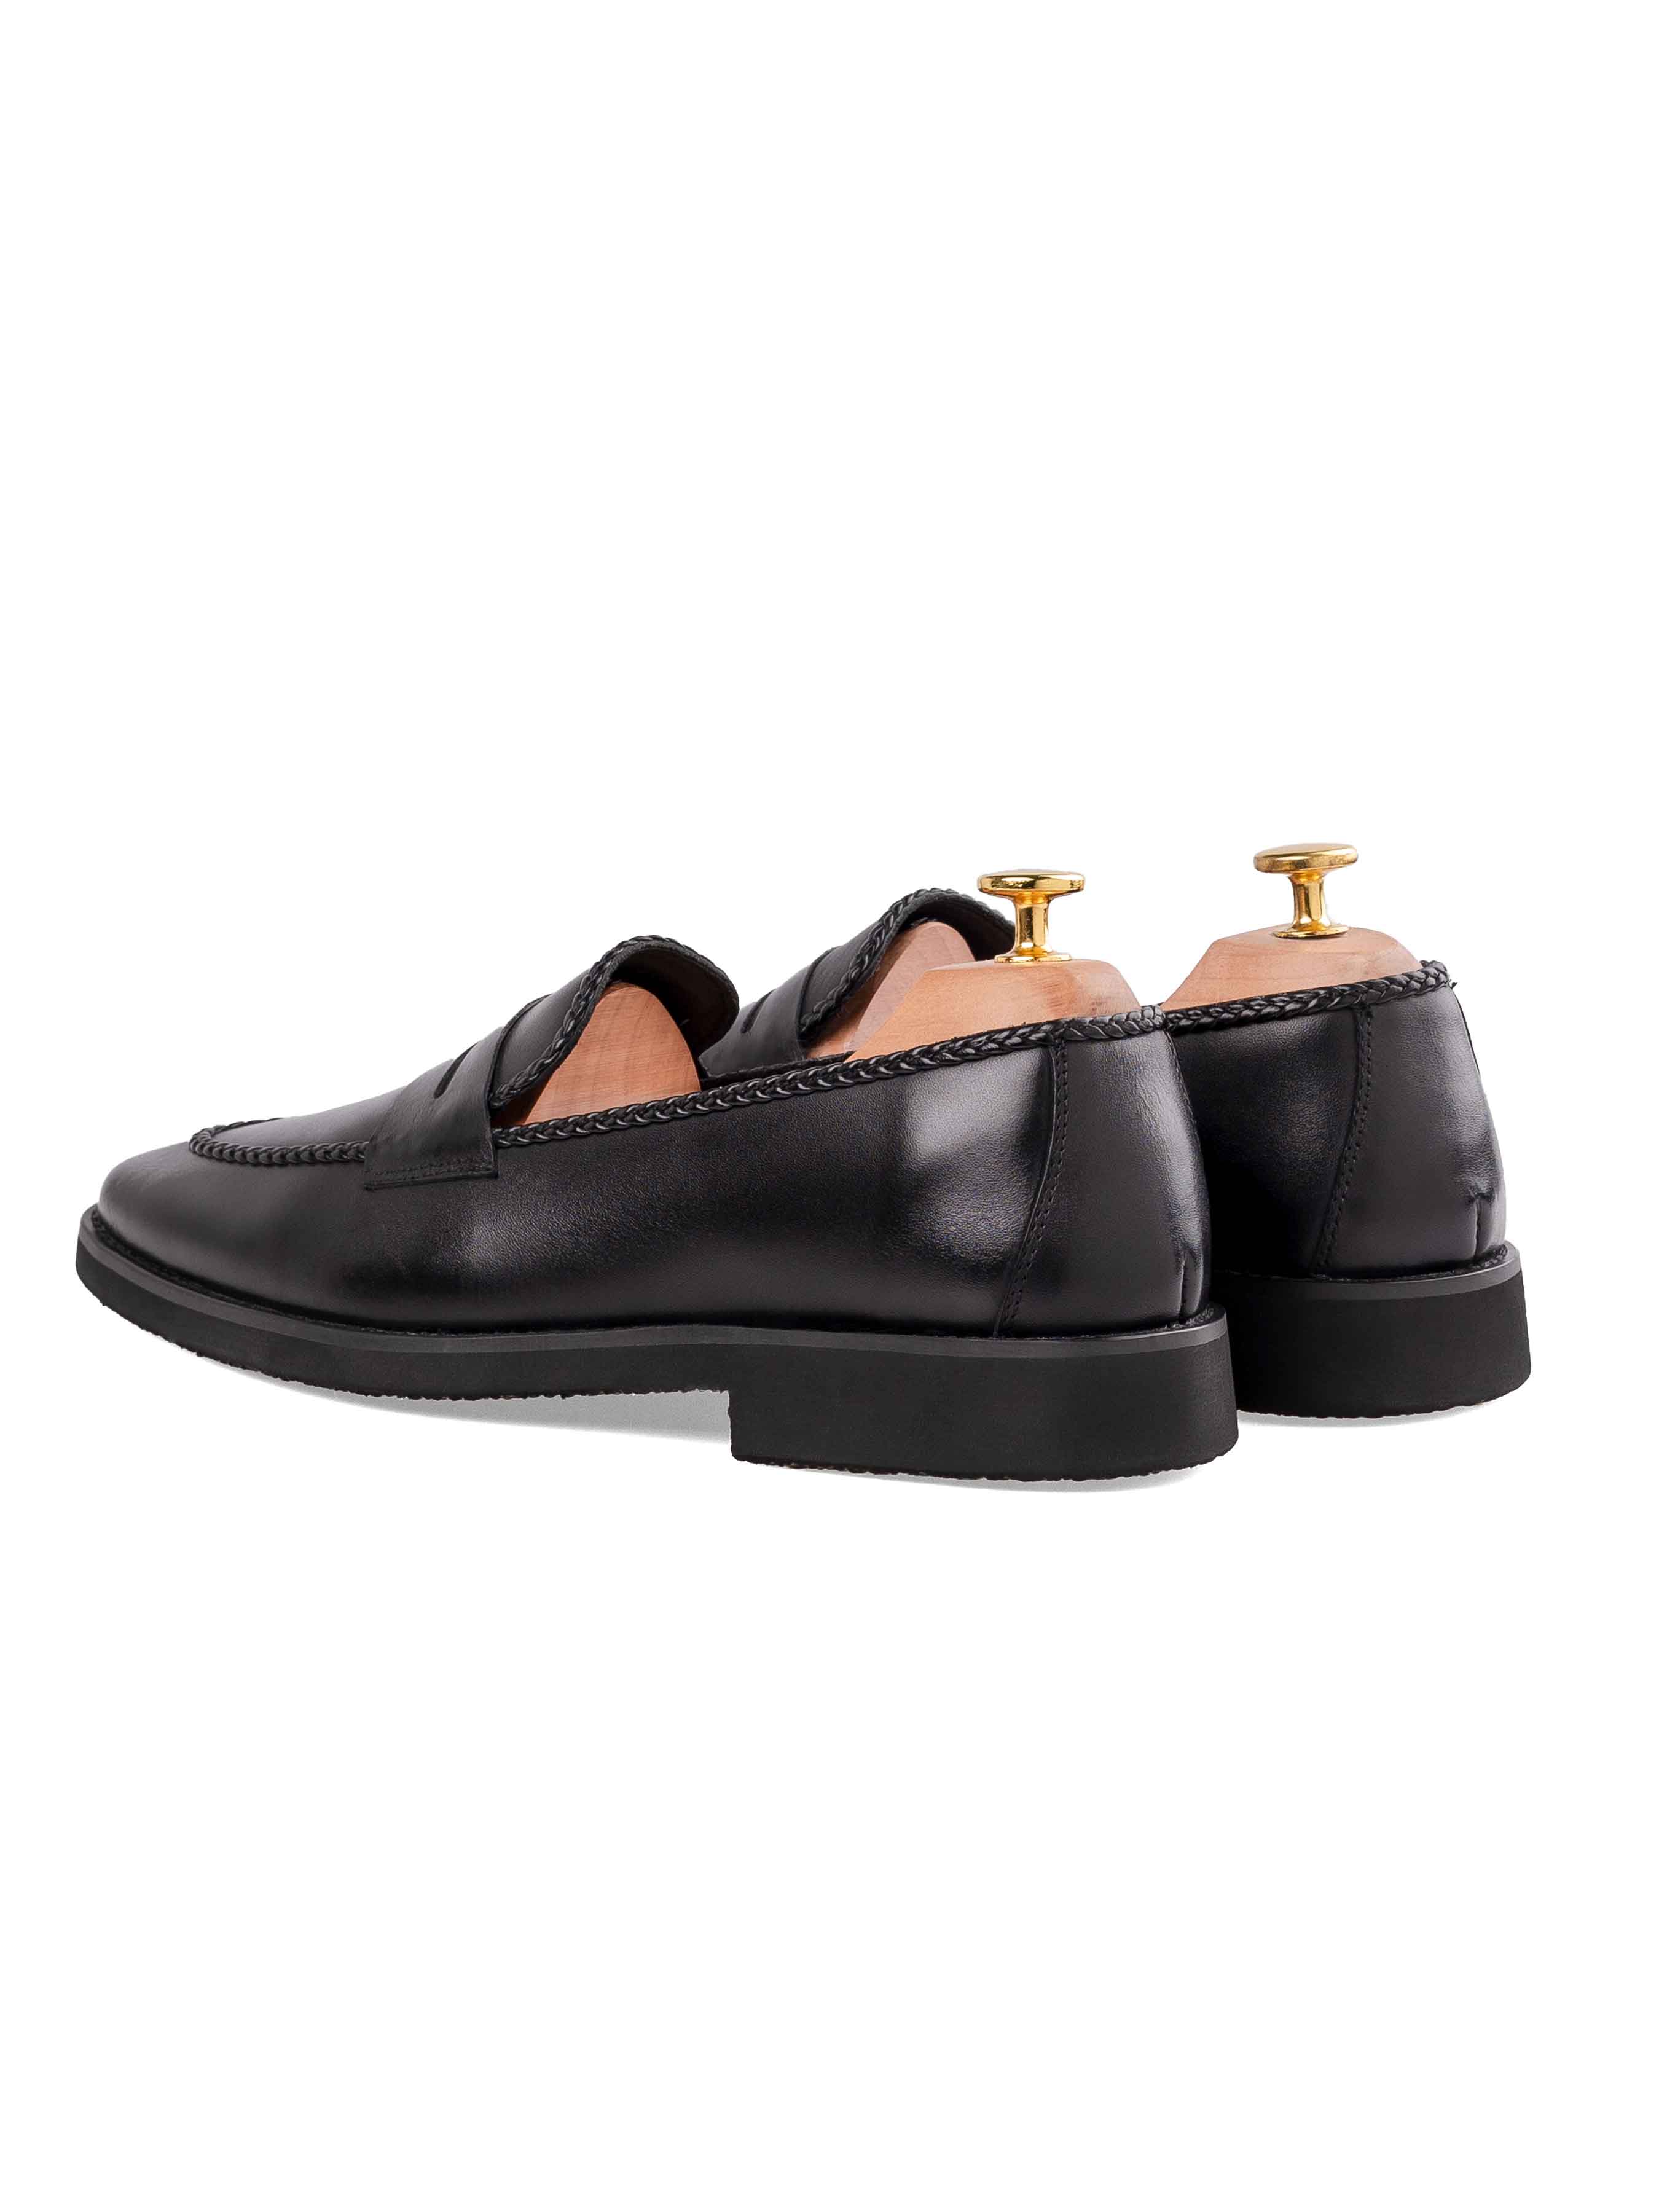 Braided Penny Loafer - Solid Black (Crepe Sole)